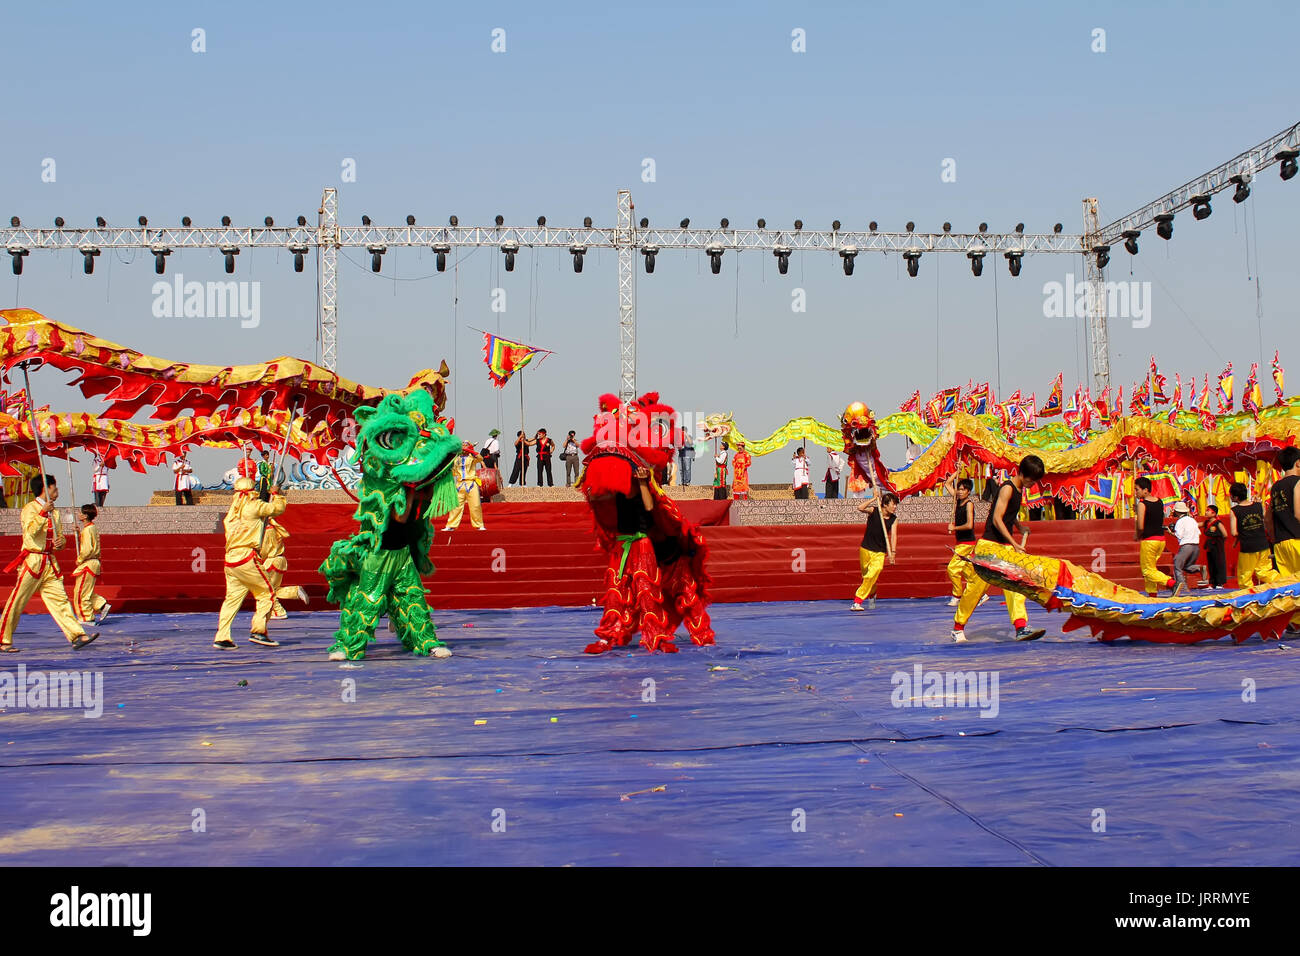 HAI DUONG, VIETNAM, February, 25: Group of people performance lion and dragon dance at Con Son, Kiep Bac festival on February, 25, 2013 in Hai Duong,  Stock Photo